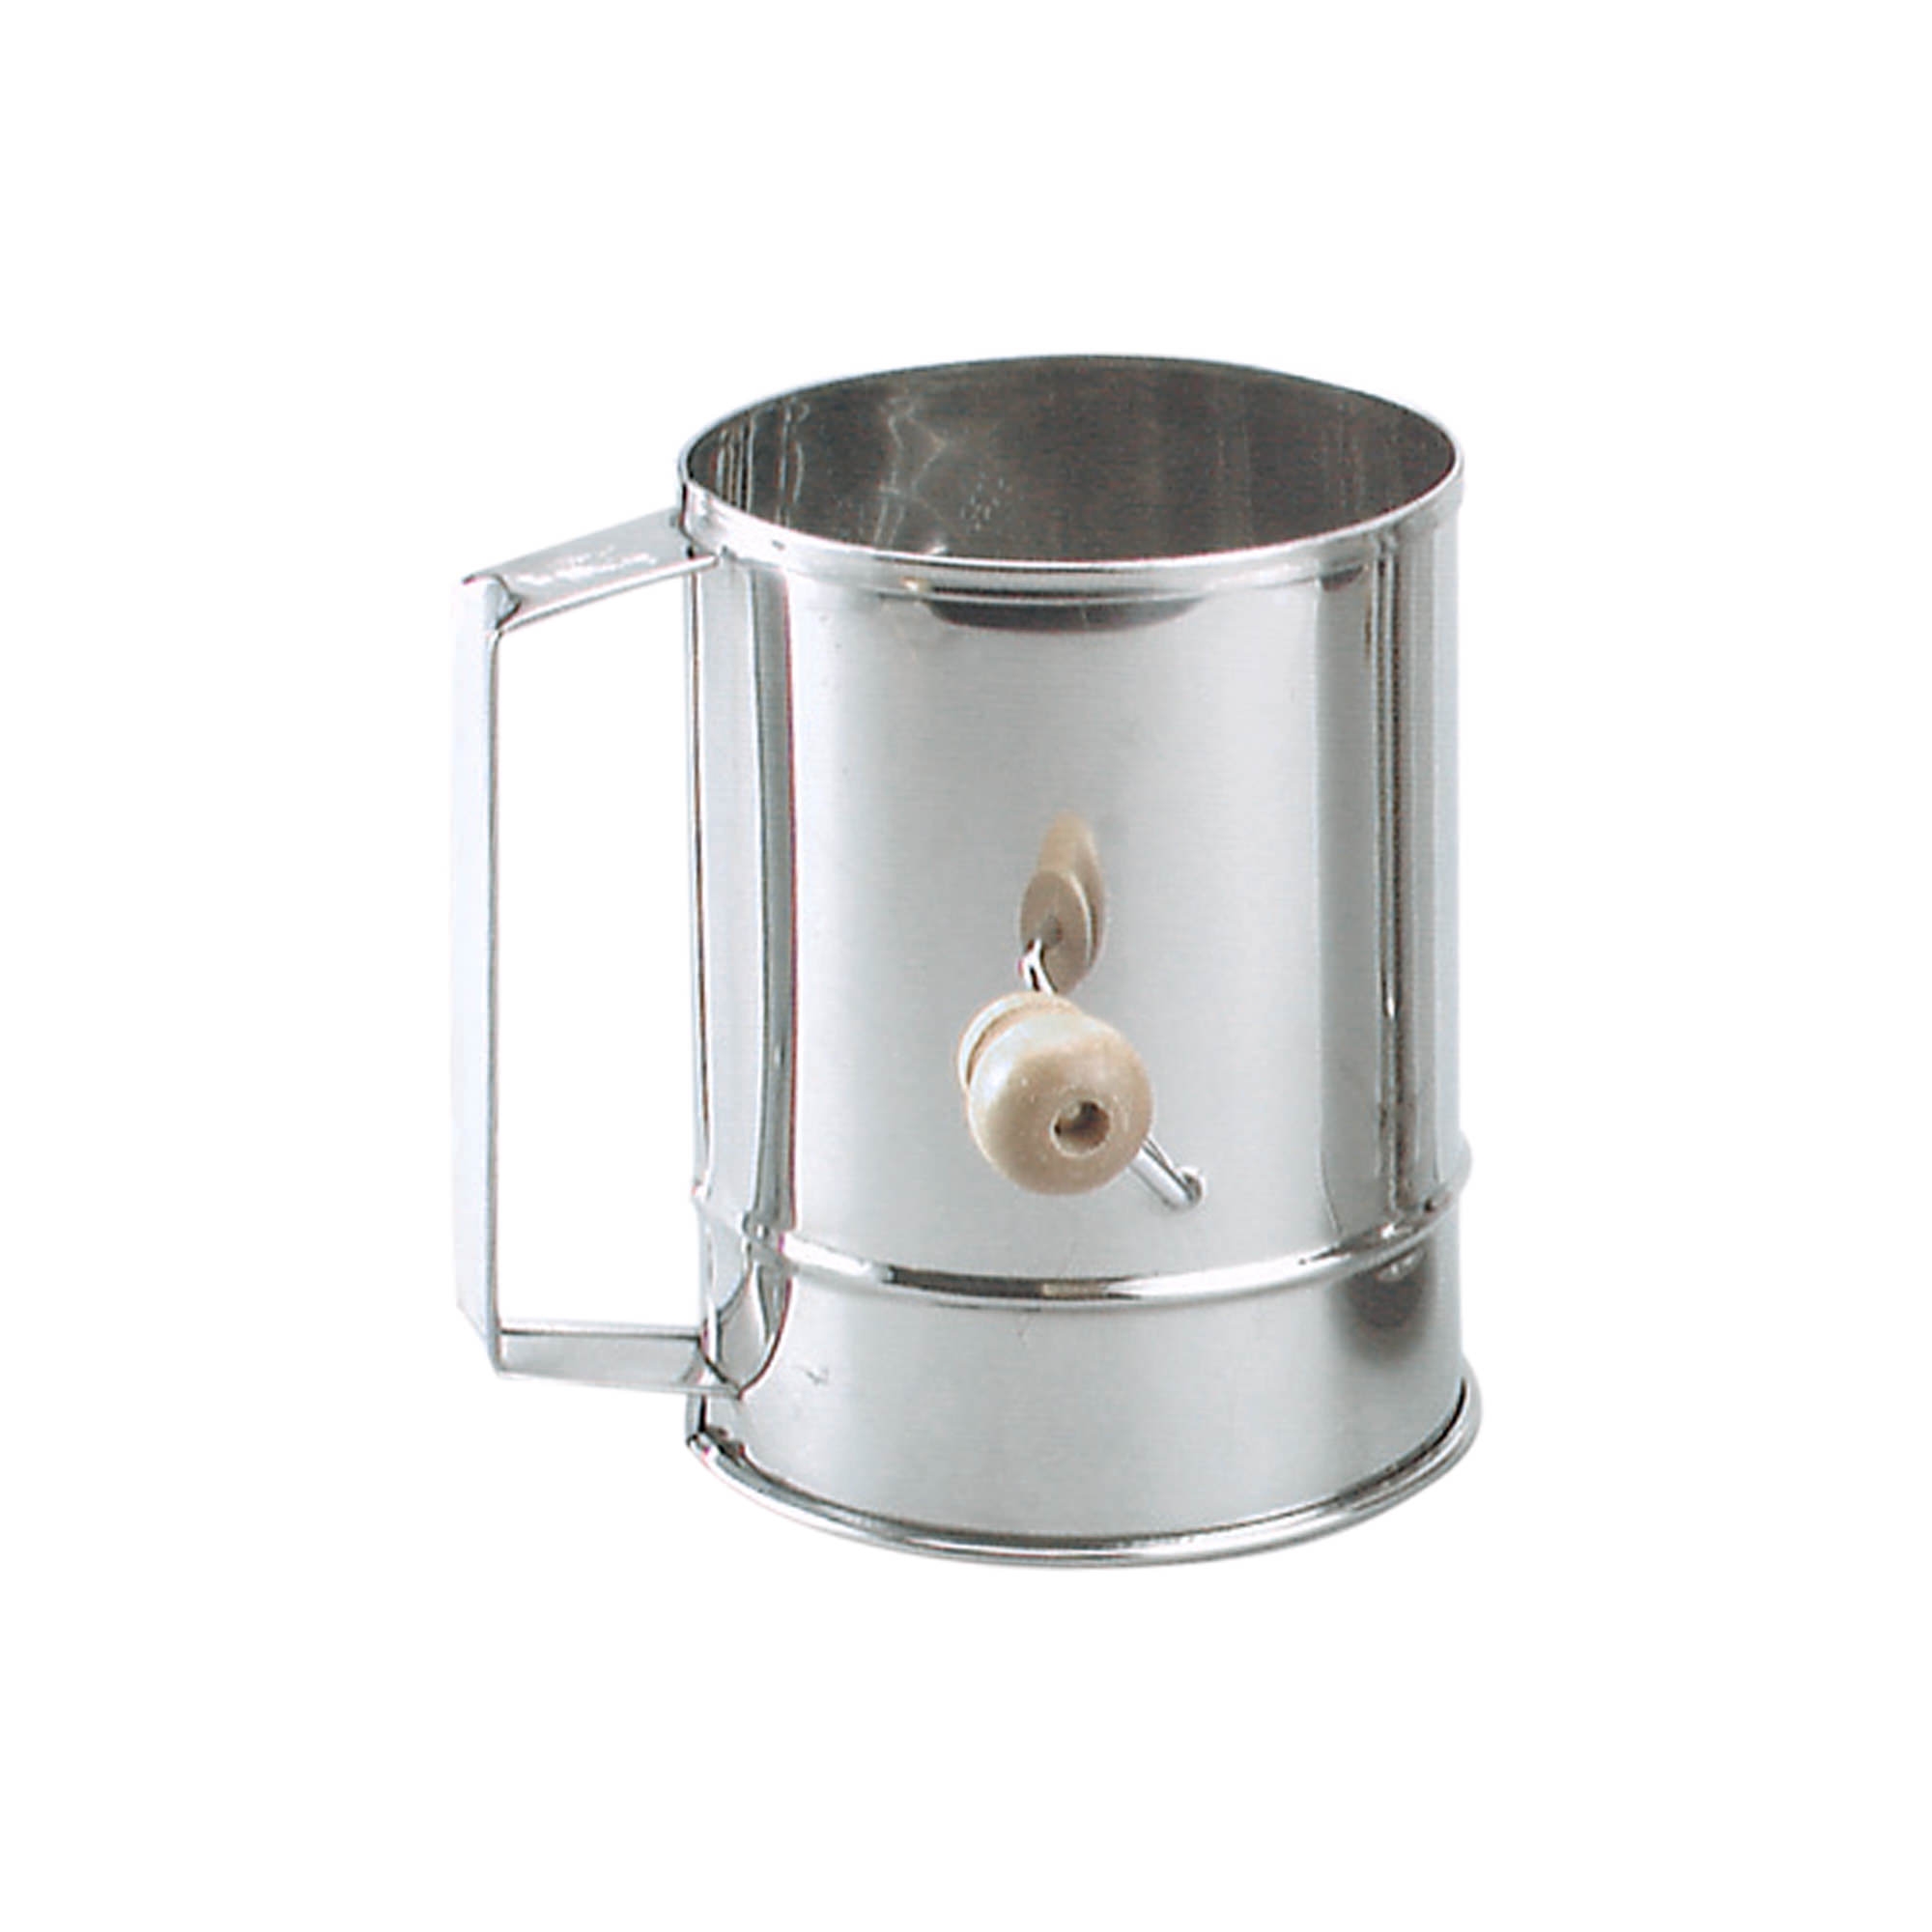 Chef Inox Flour Sifter S/S with Crank Handle 8-Cup Image 1